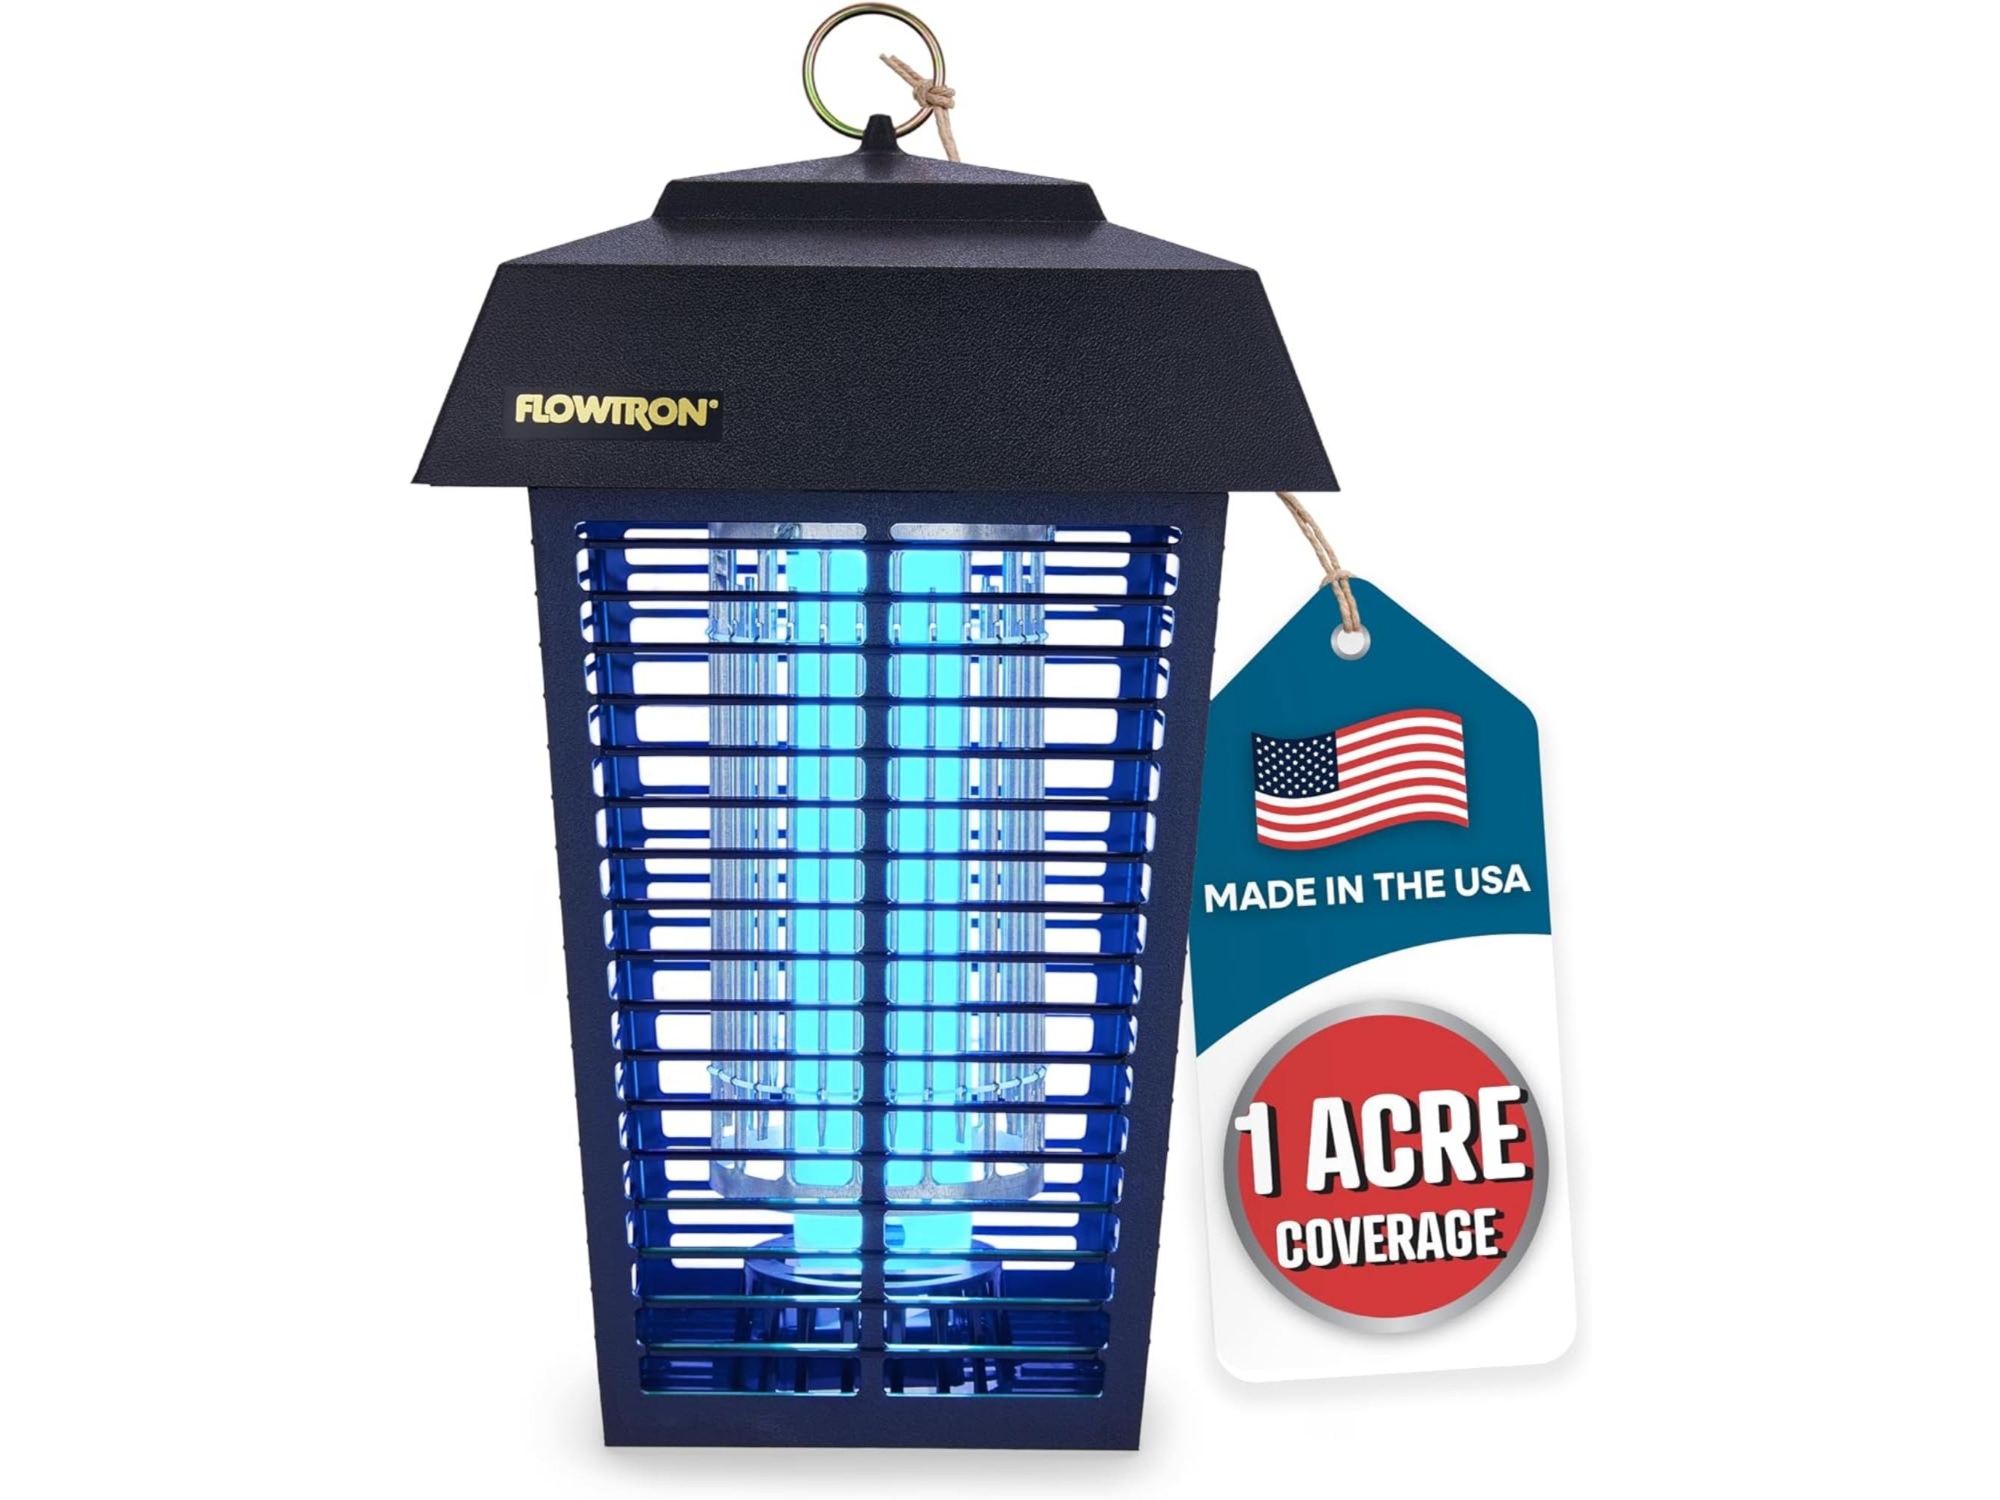 Image of Flowtron Bug Zapper Mosquito Zapper with 1 Acre of Coverage Black ID 026713700433